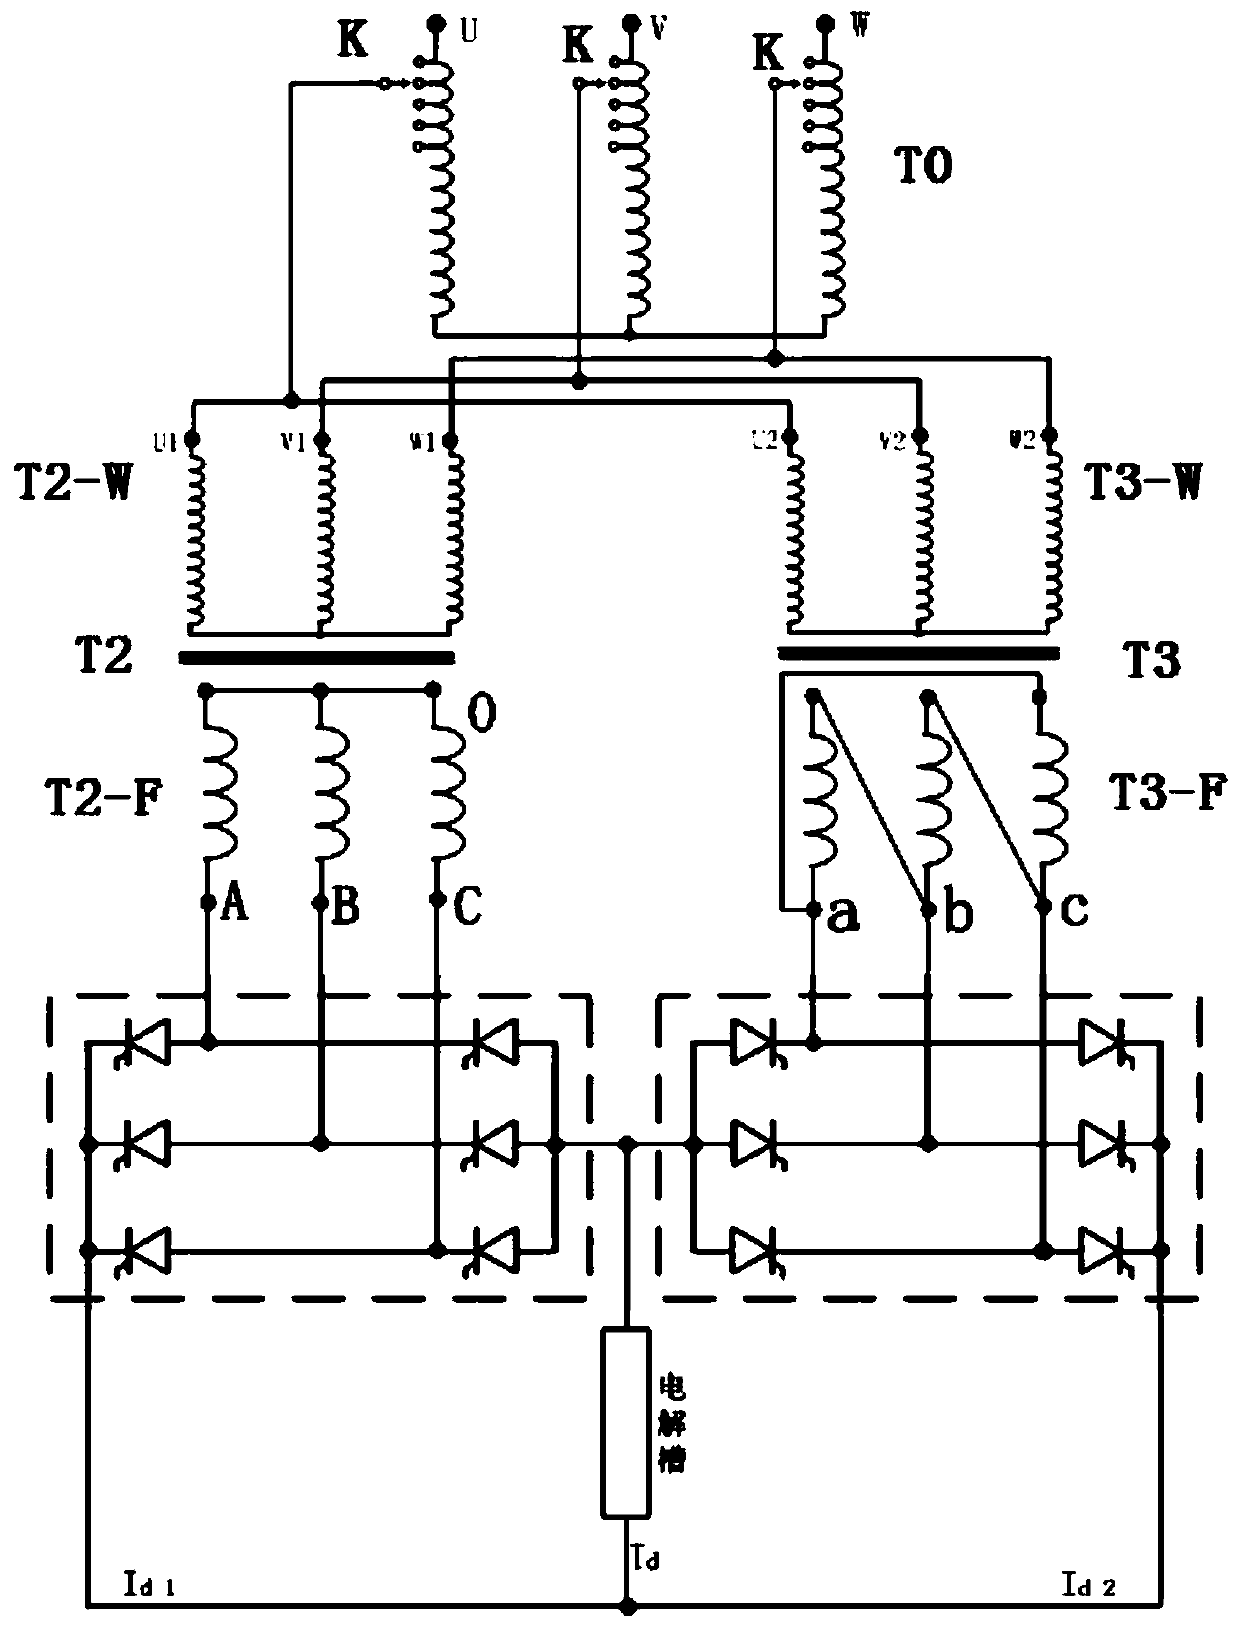 Single 12-pulse rectifier transformer and equivalent multi-phase rectifier unit formed by same